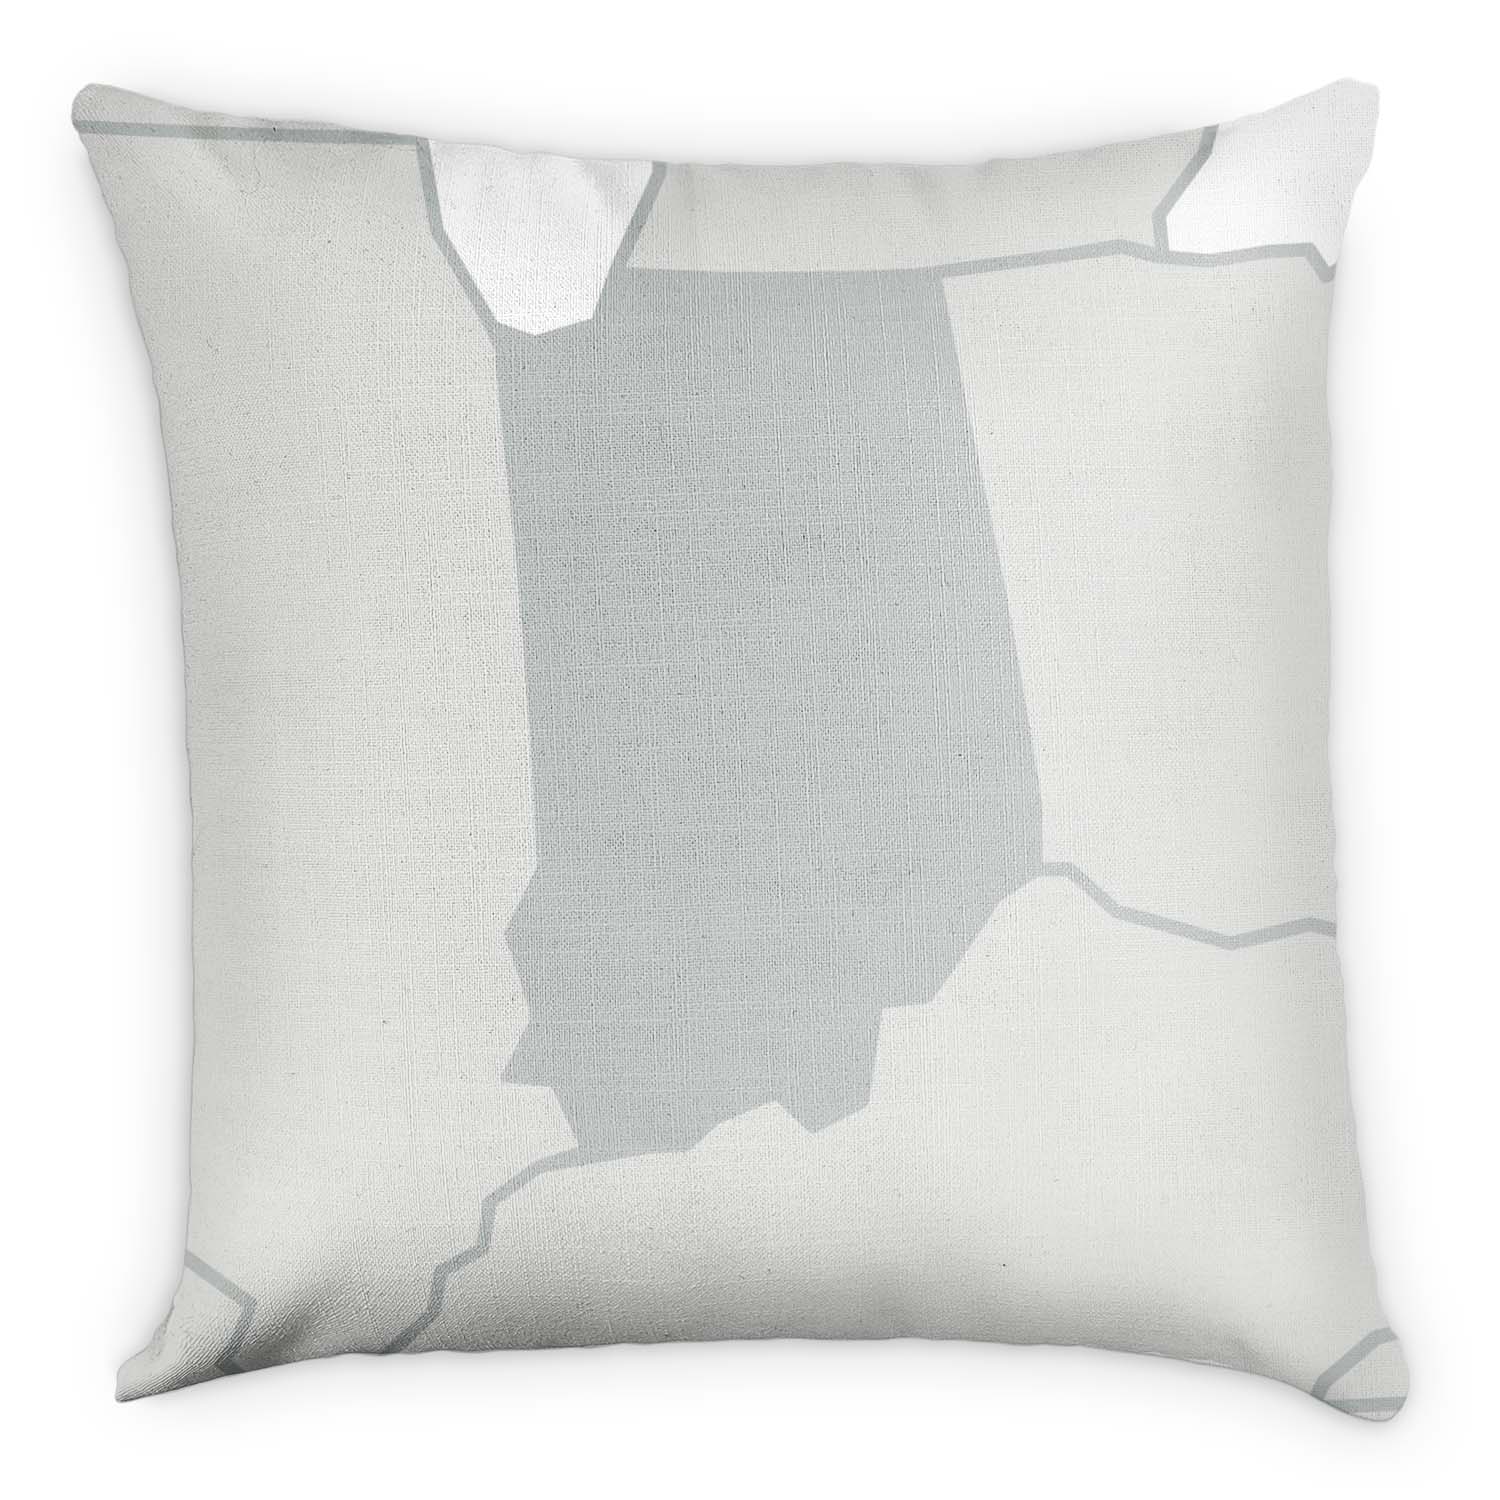 Indiana Square Pillow - Linen -  - Knotty Tie Co.